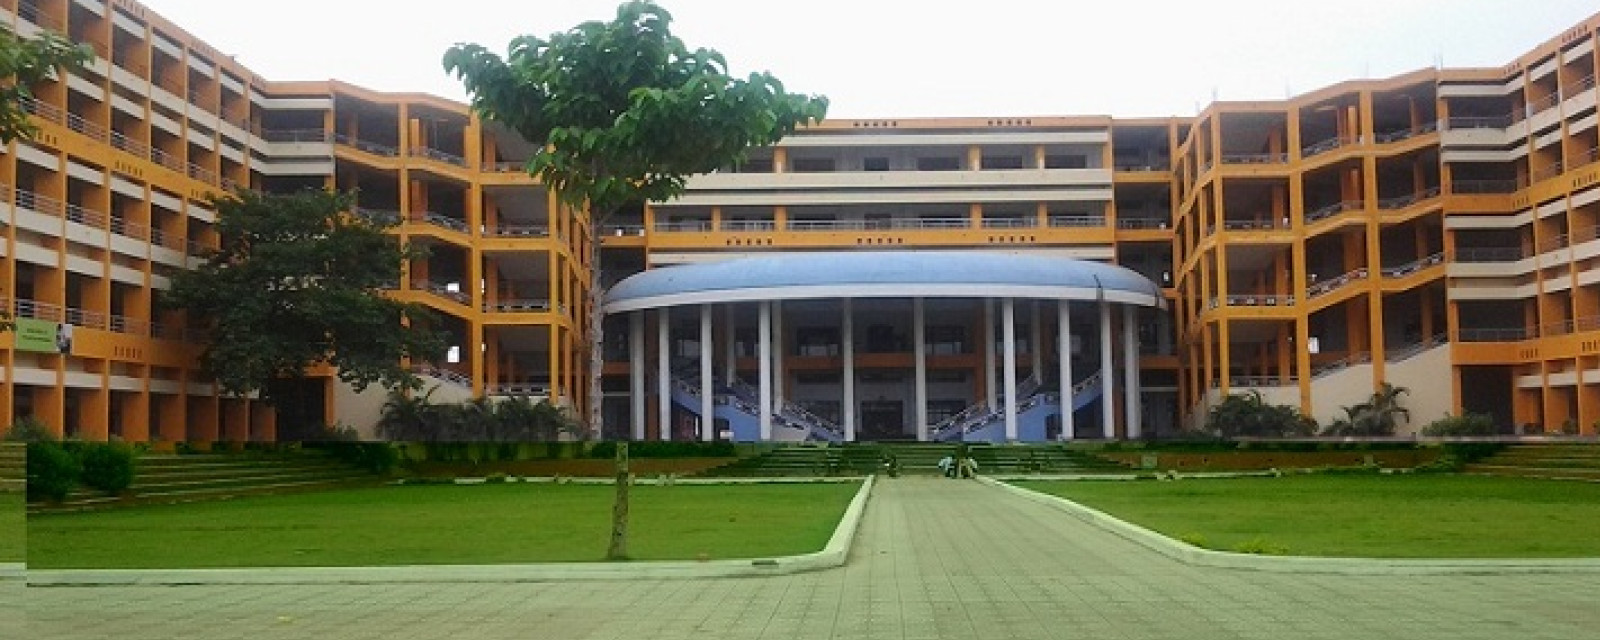 Vignan University (VU) UG Admissions 2019: Entrance Exam, Placement, Results, Fees